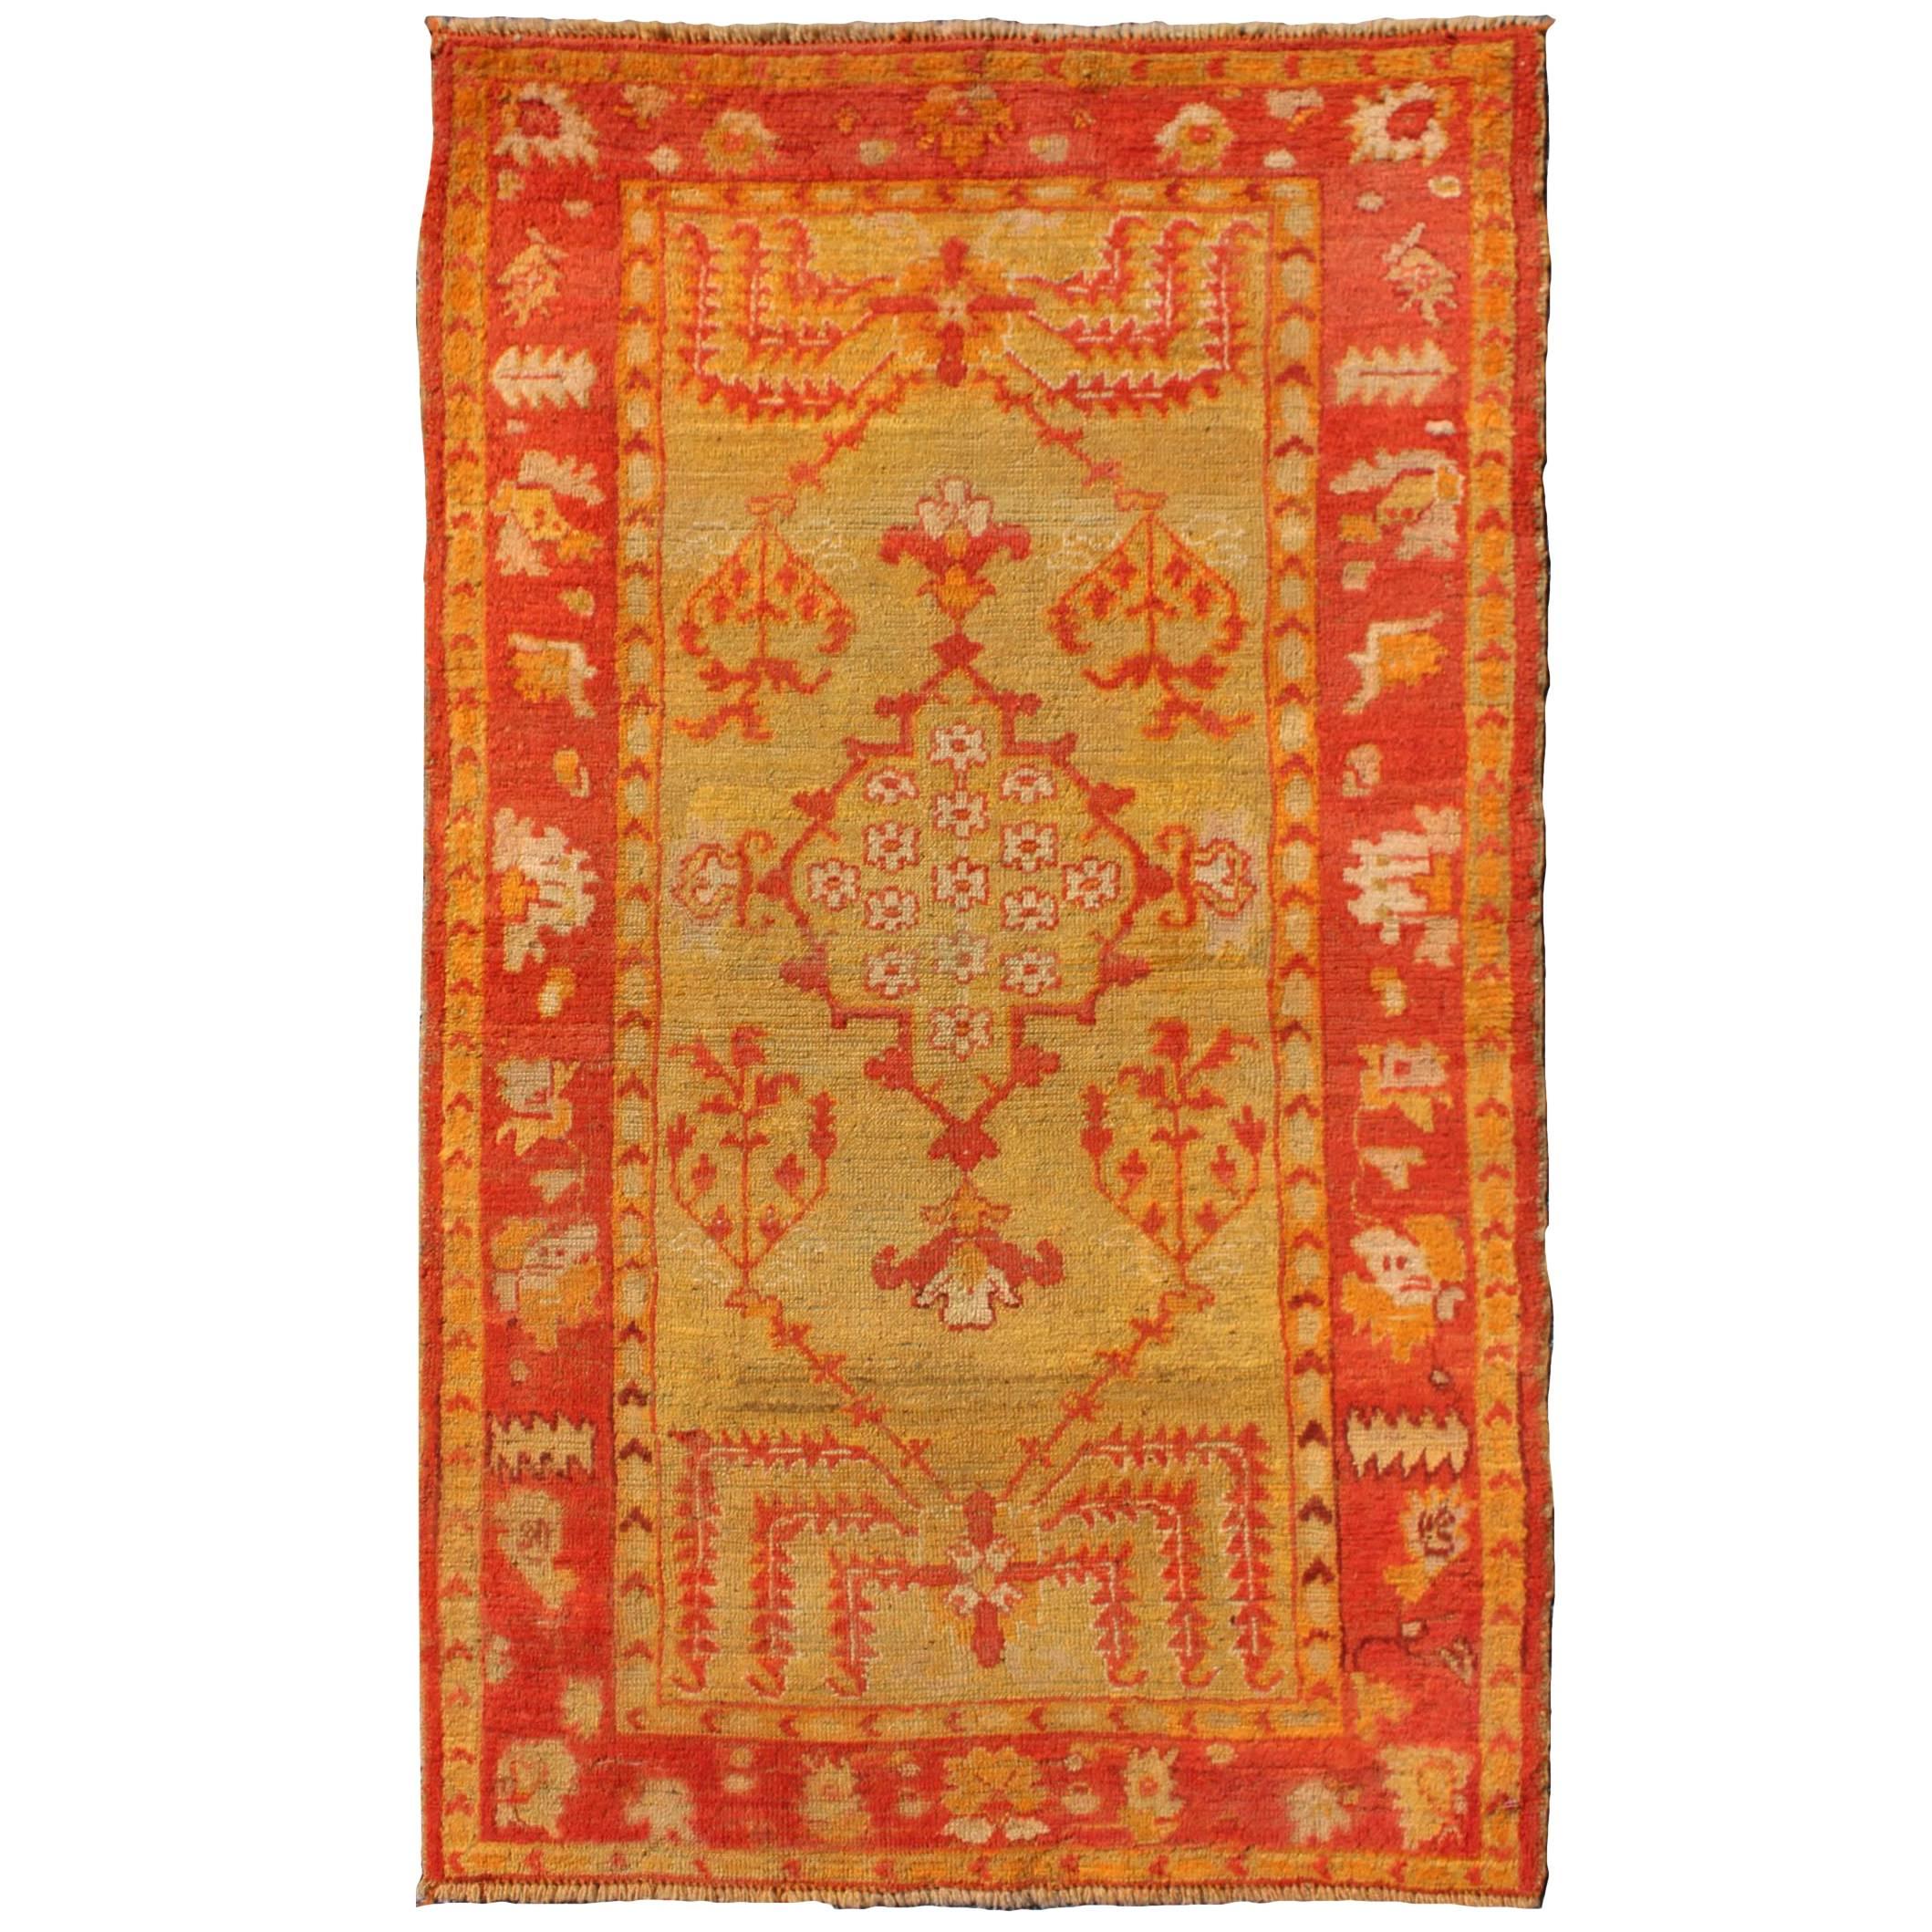 Antique Turkish Oushak Rug With Willow Trees Design in Orange Red & Yellow-Green For Sale